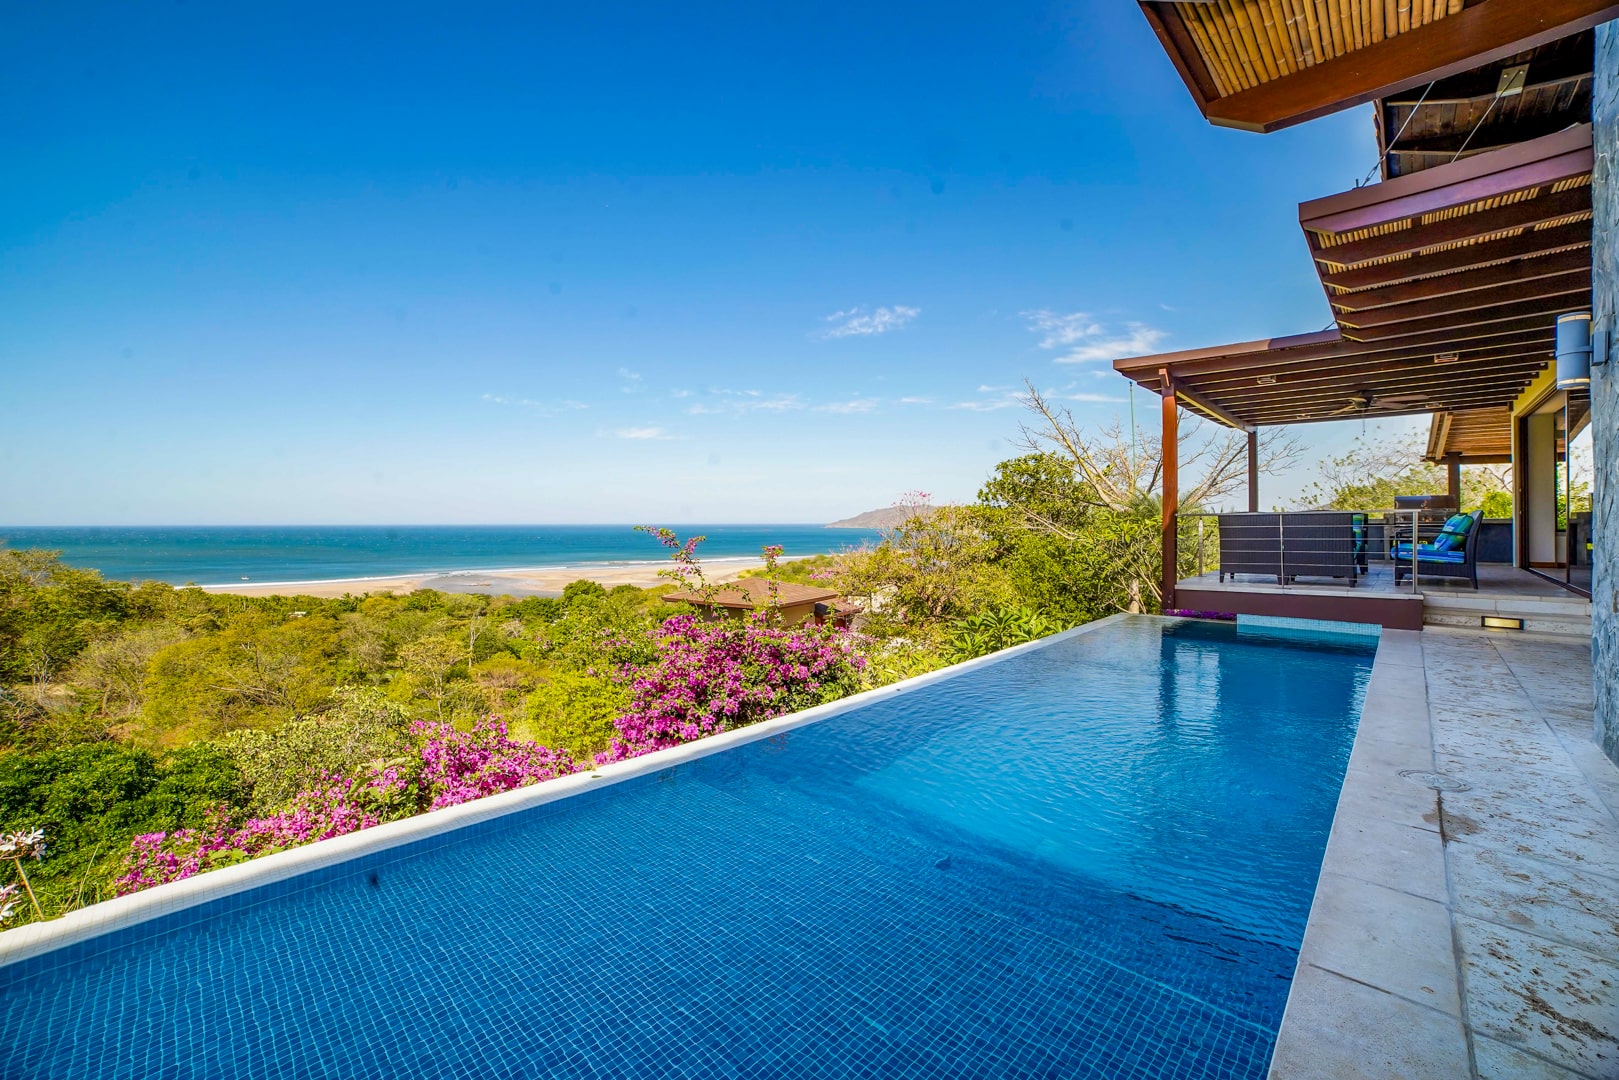 Top 10 Costa Rica Luxury Pools & Outdoor Living Vacation Homes